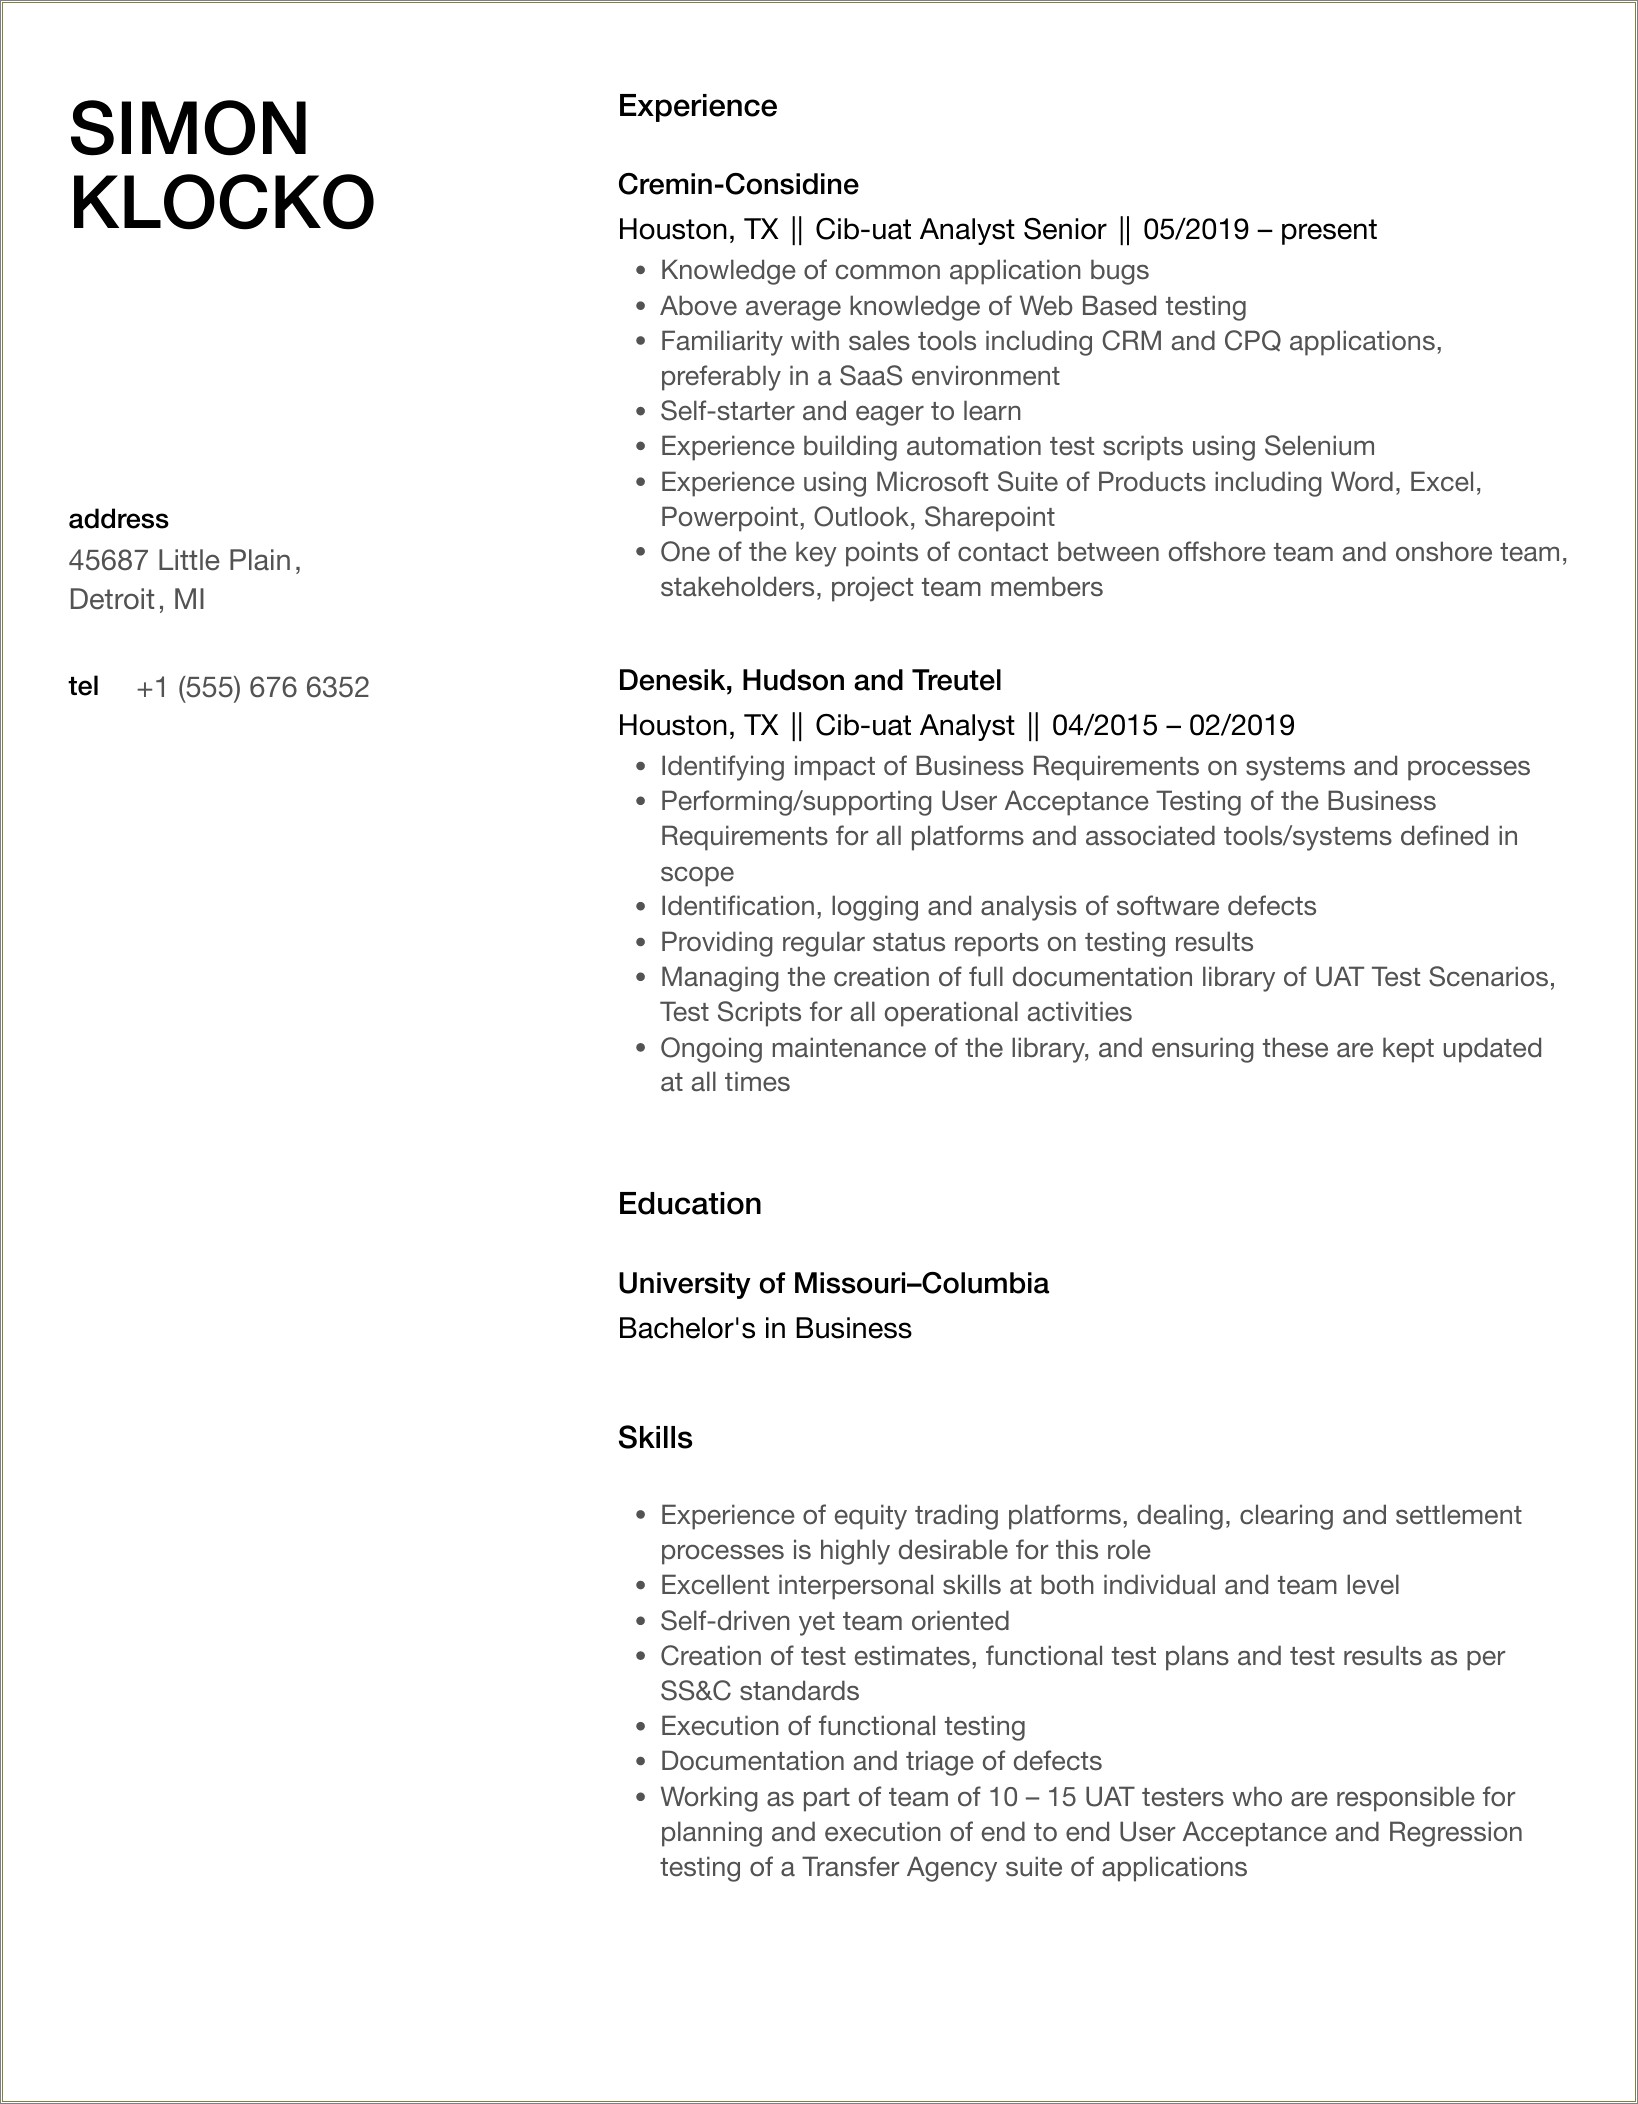 Business Analyst Resume With Uat Experience